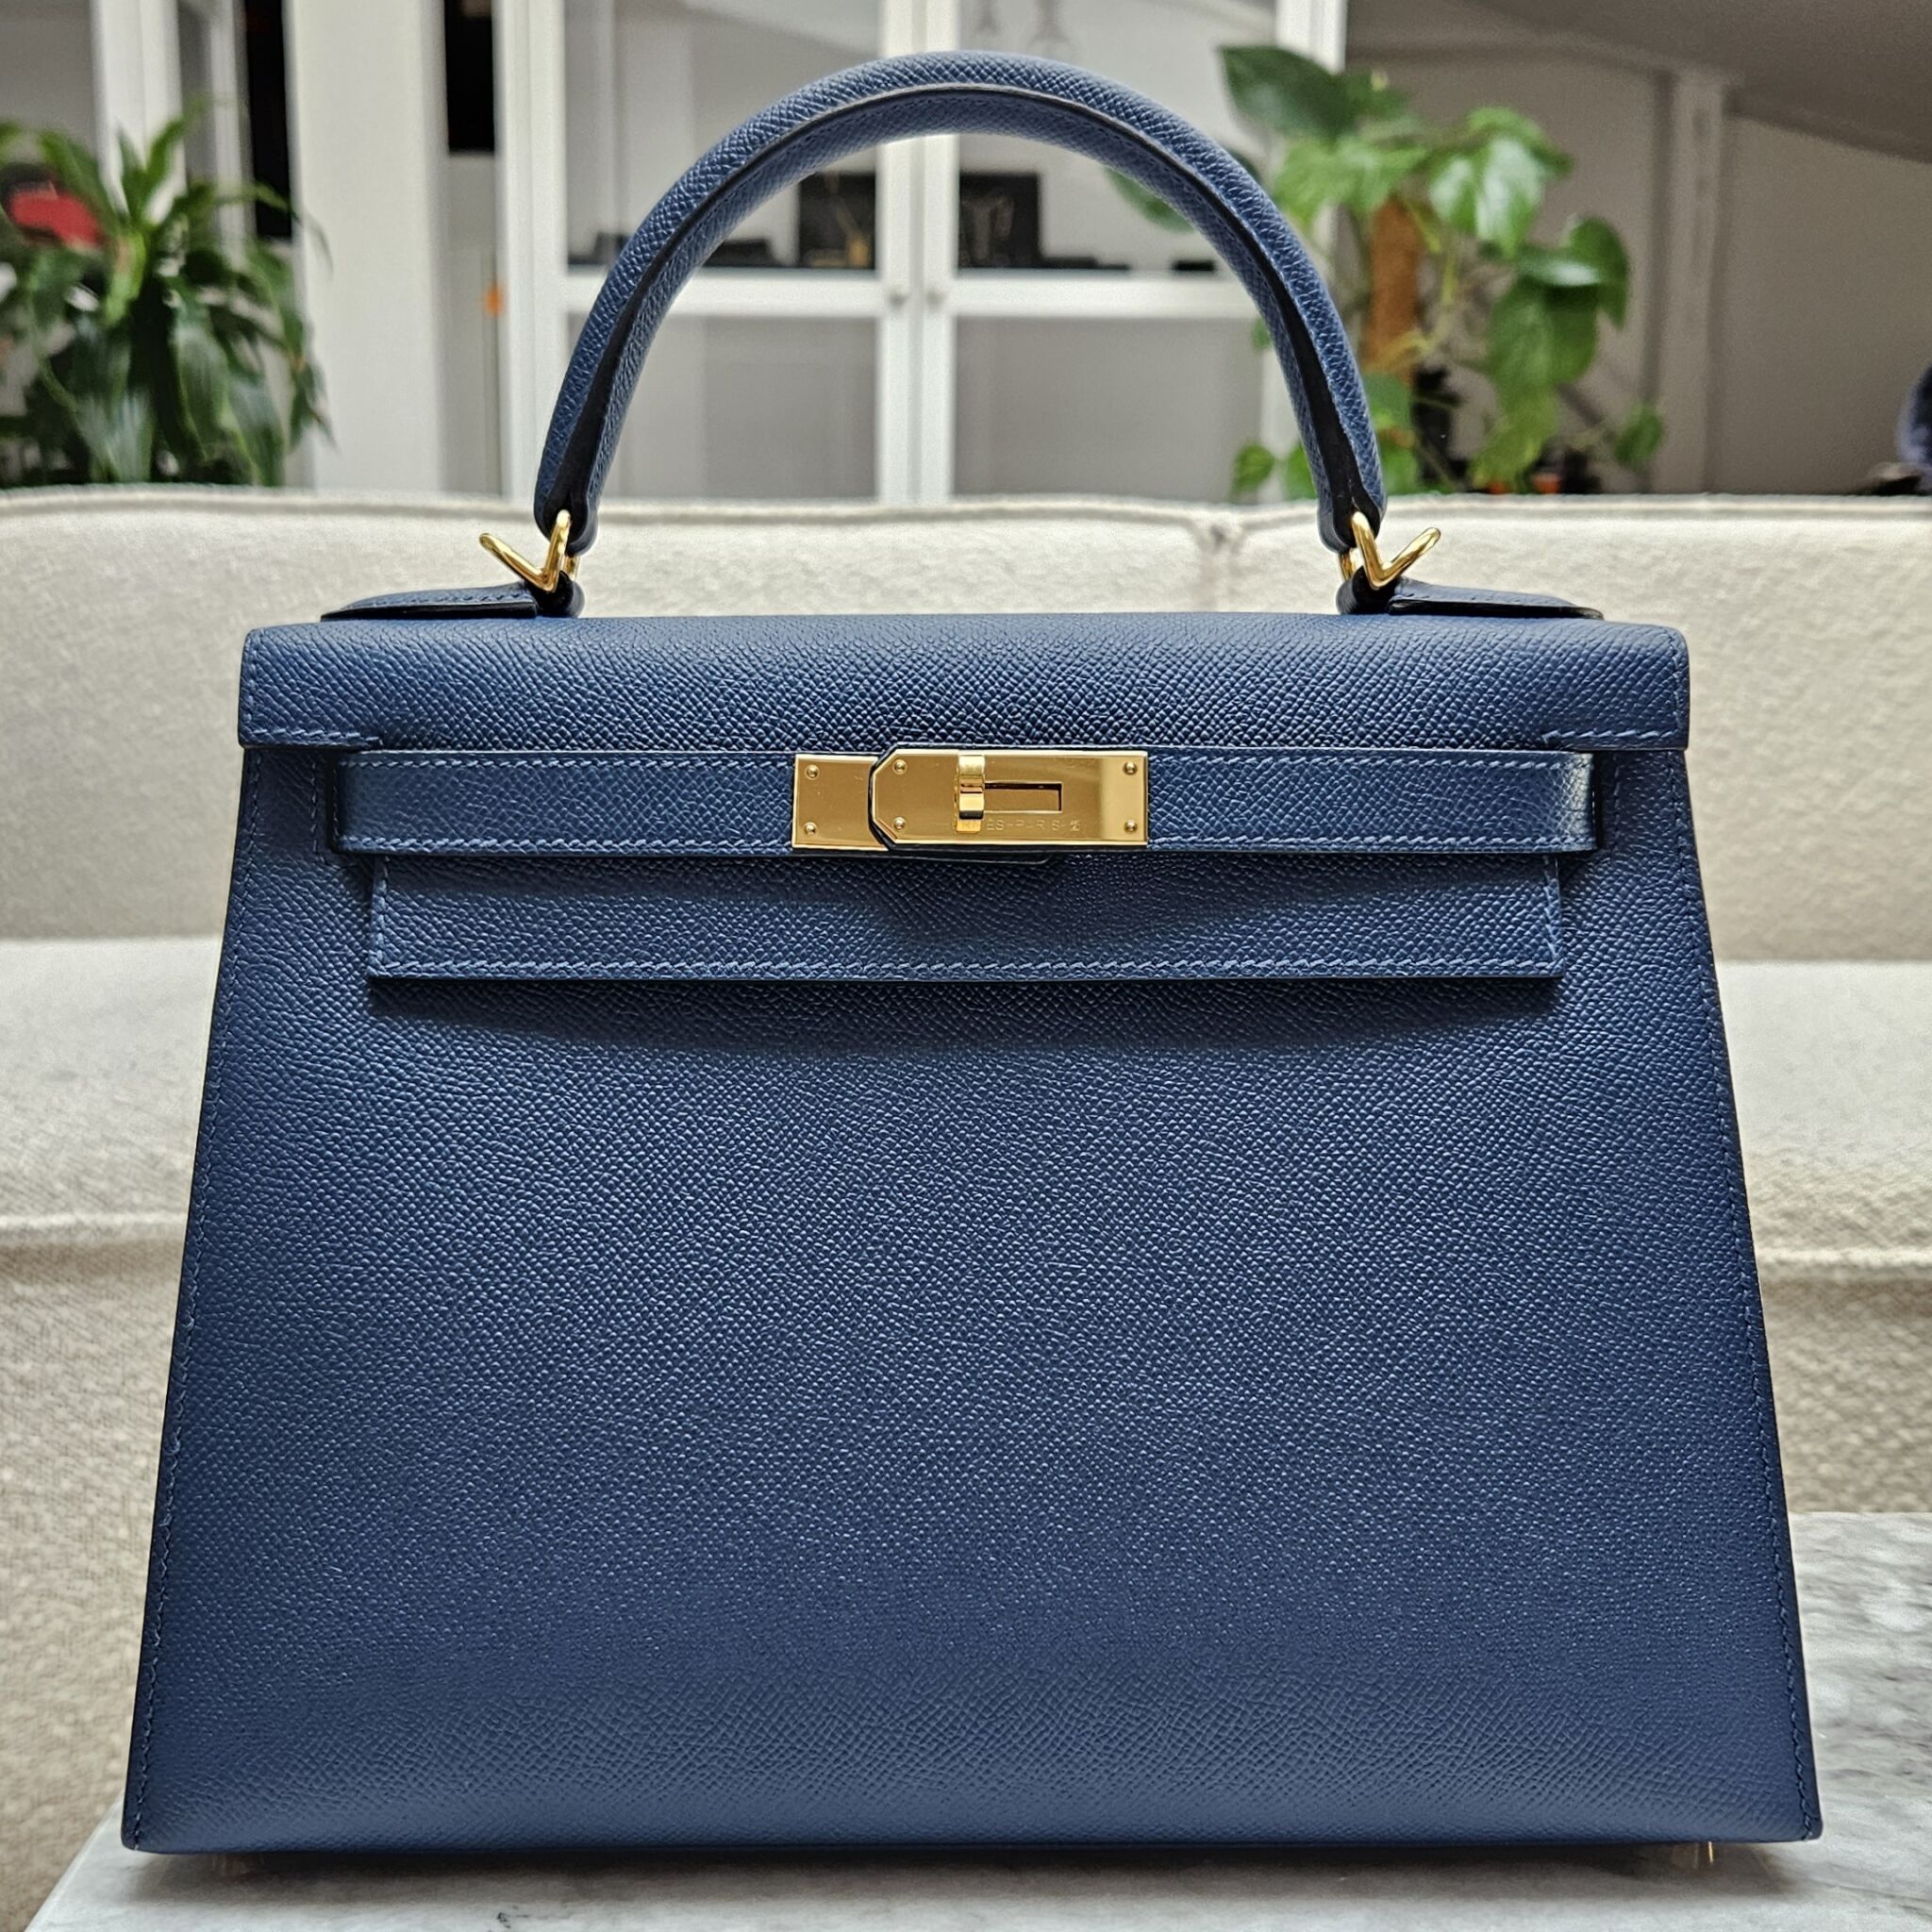 Limited edition Kelly 28 sellier Color deep blue/mykonos/brique Epsom ghw